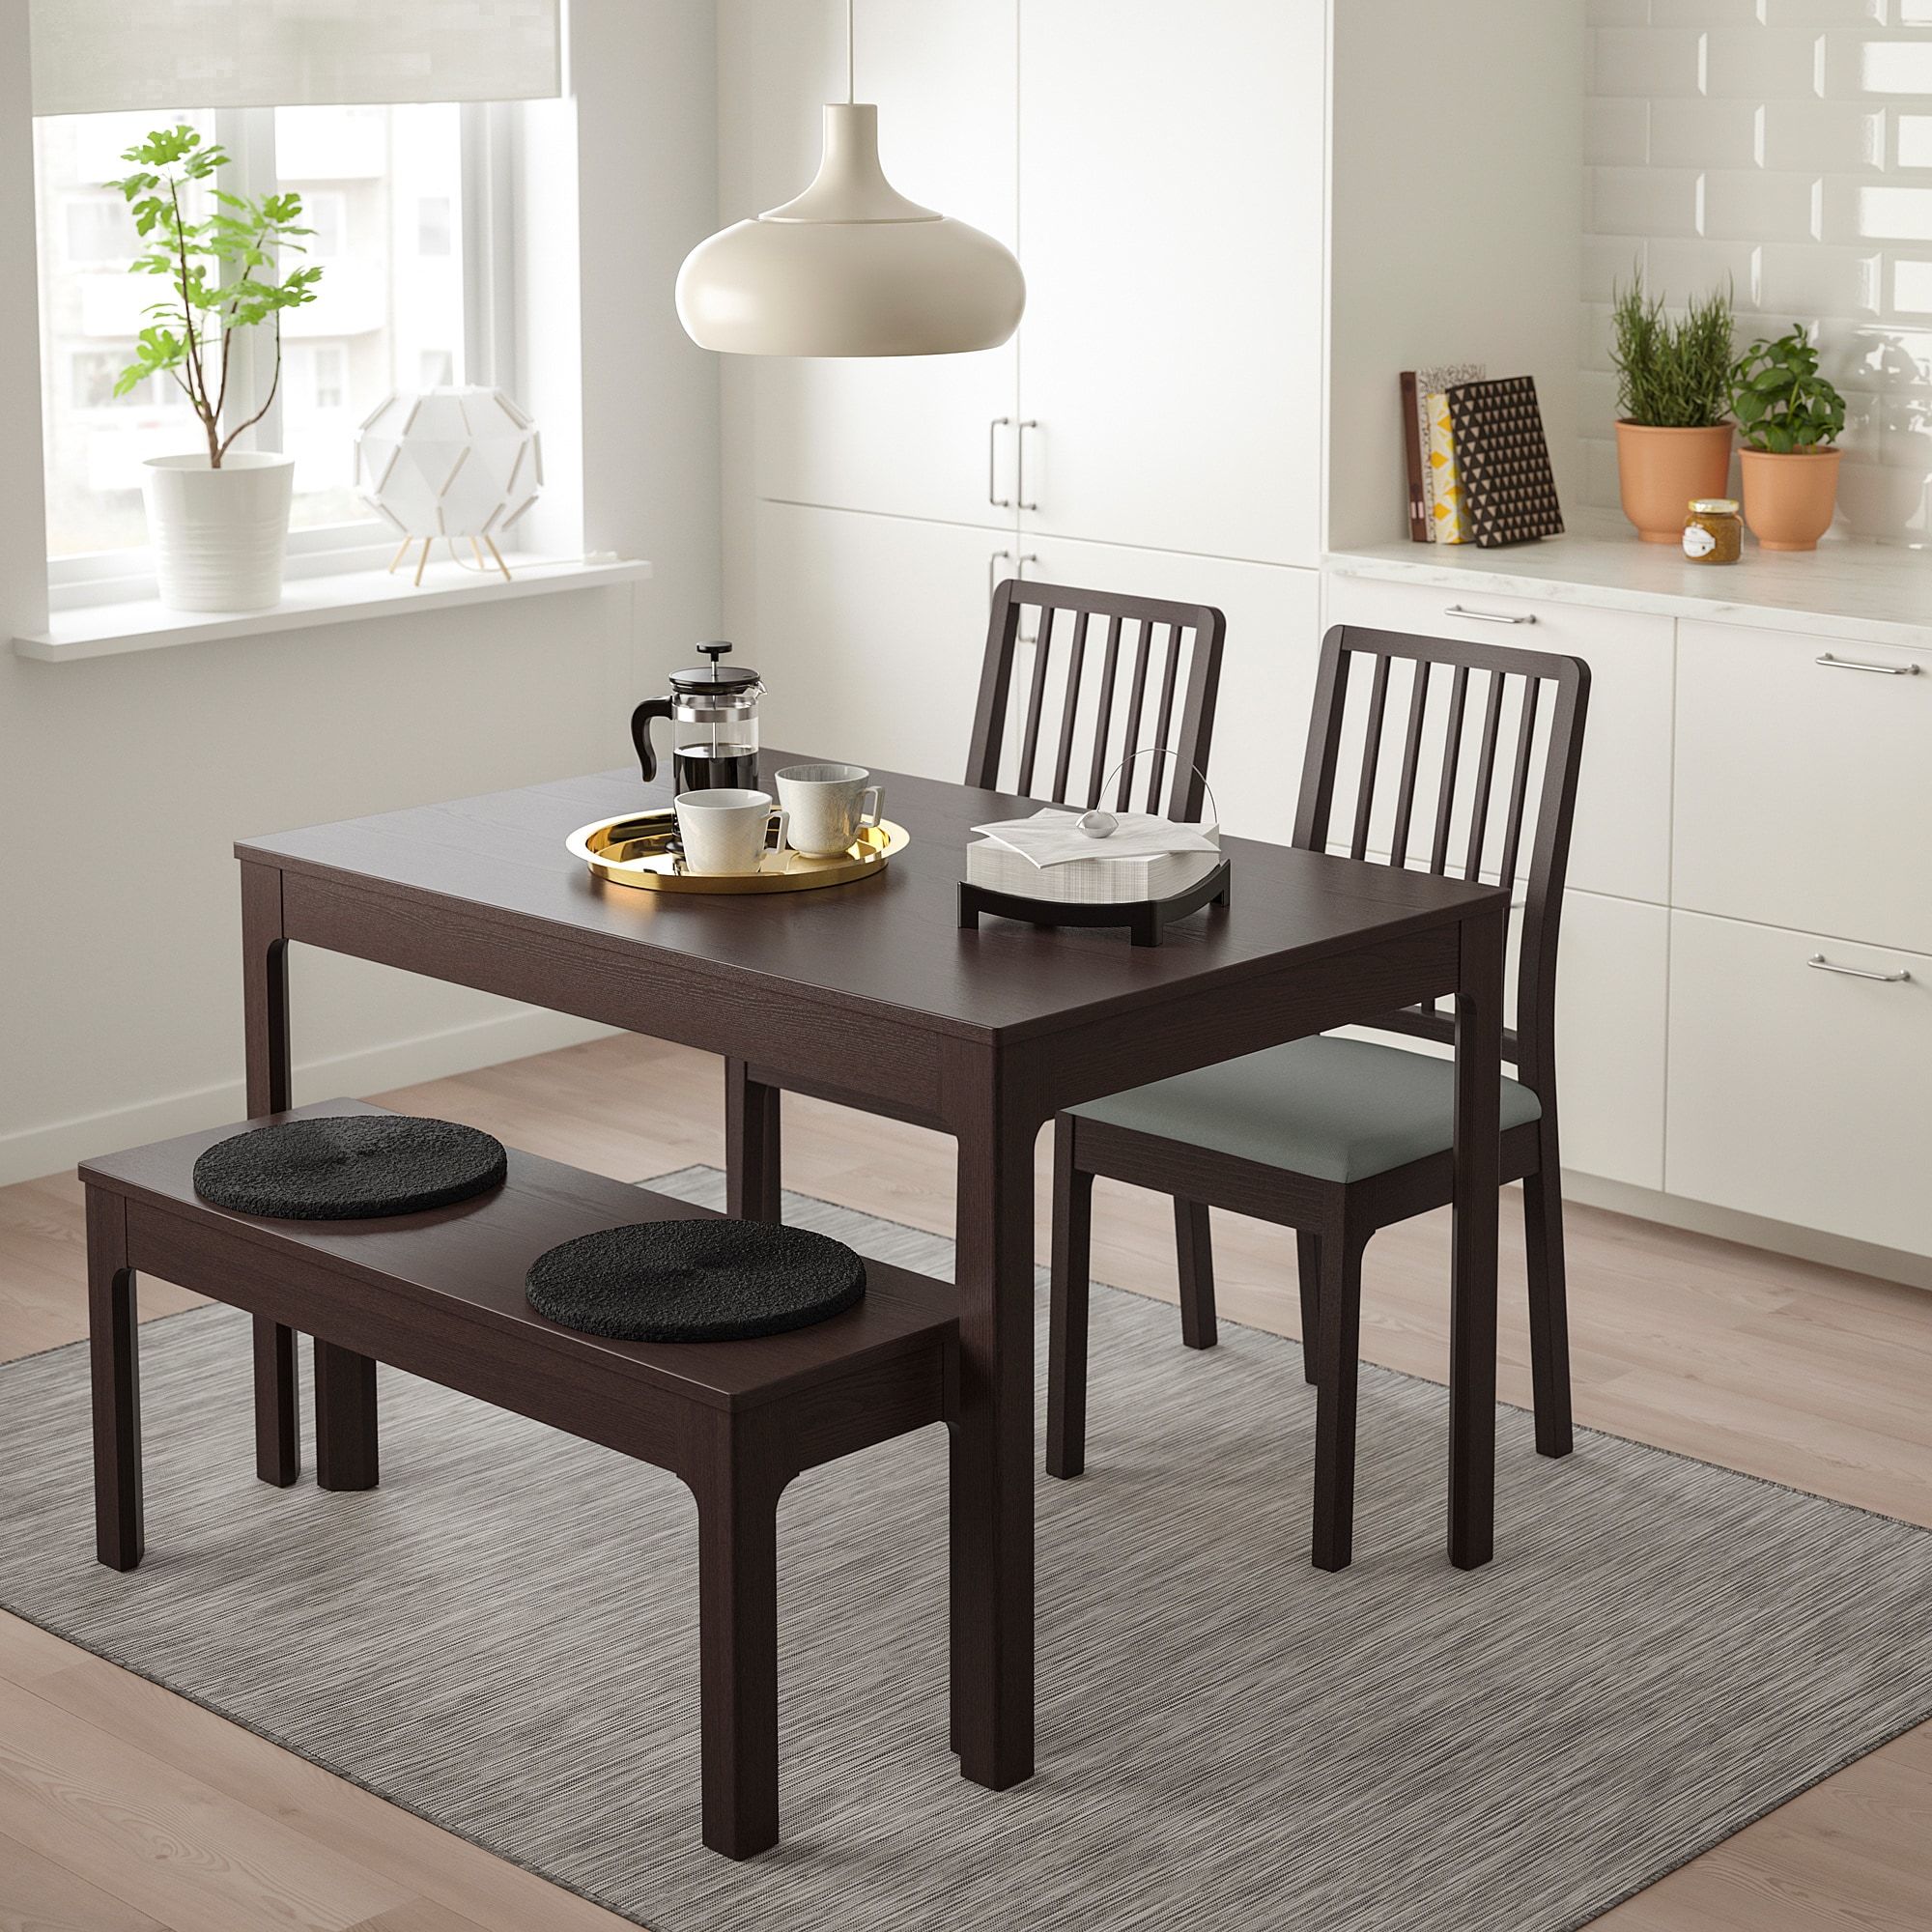 10 Best Ikea Kitchen Tables And Dining, Round Table With Four Chairs Ikea